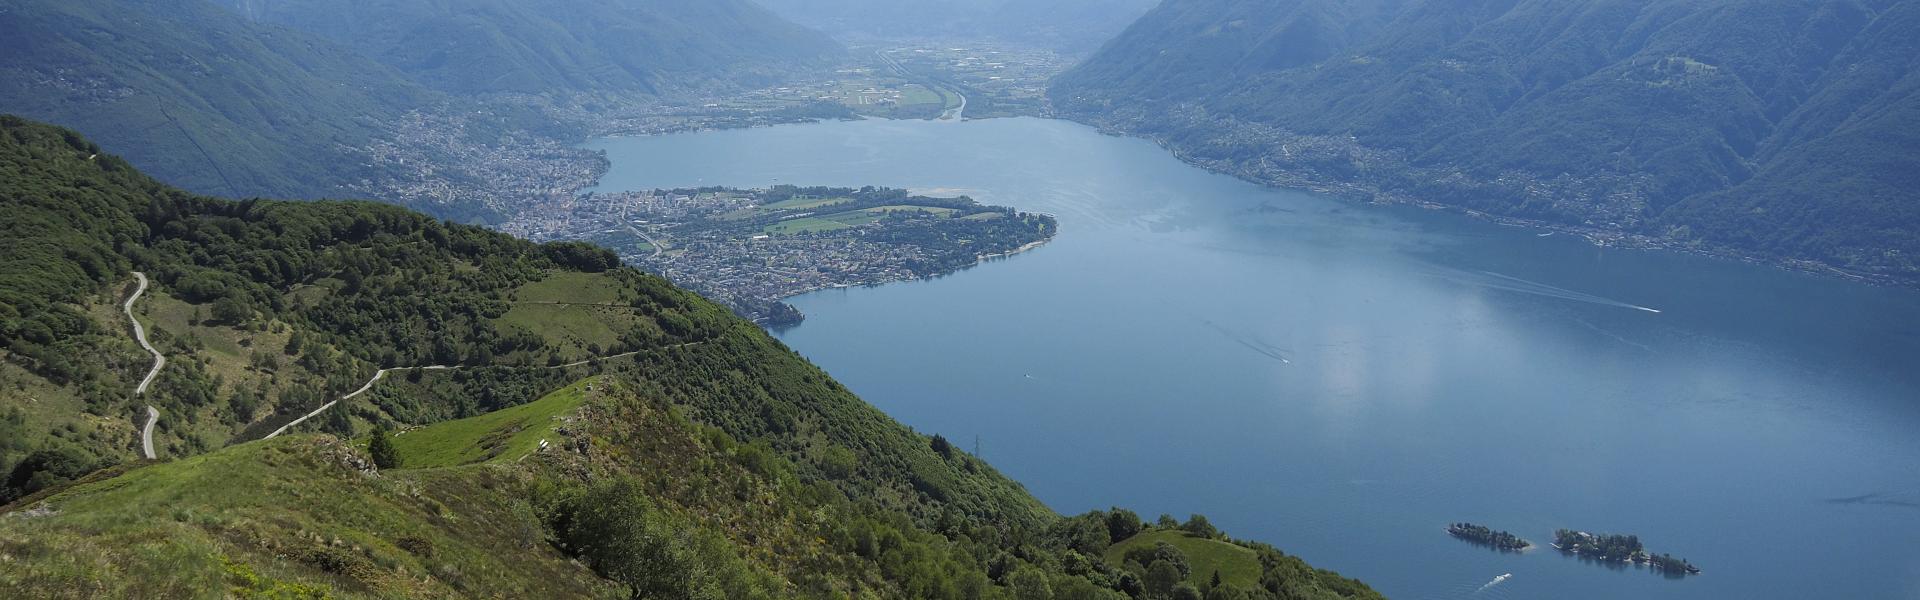 The Swiss side of Lake Maggiore on a sunny morning in May, seen from Porera, Monti di Ronco, near the cities of Locarno and Ascona. The cities of Locarno and Ascona are partly visible in the distance with the Maggia river delta.